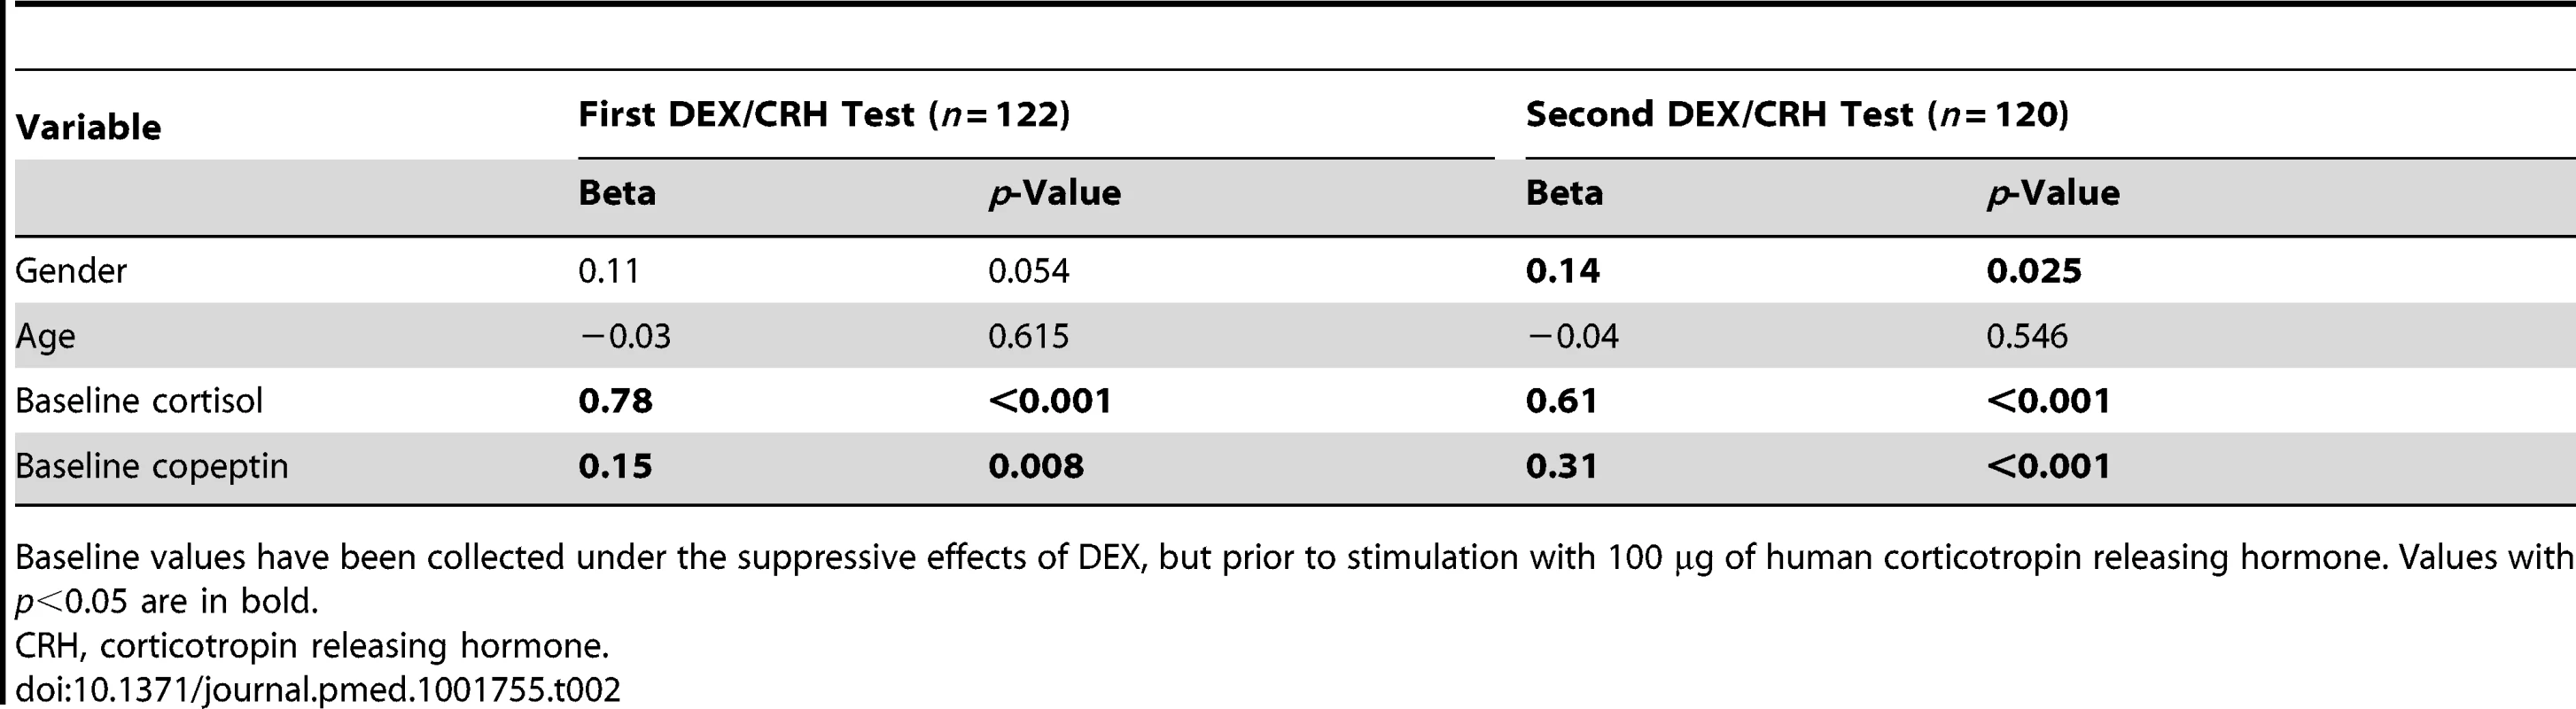 Regression model predicting cortisol response in the first and second dexamethasone/corticotropin releasing hormone test (in terms of total area under the curve) using gender, age, dexamethasone-suppressed baseline cortisol, and baseline copeptin as predictor variables.